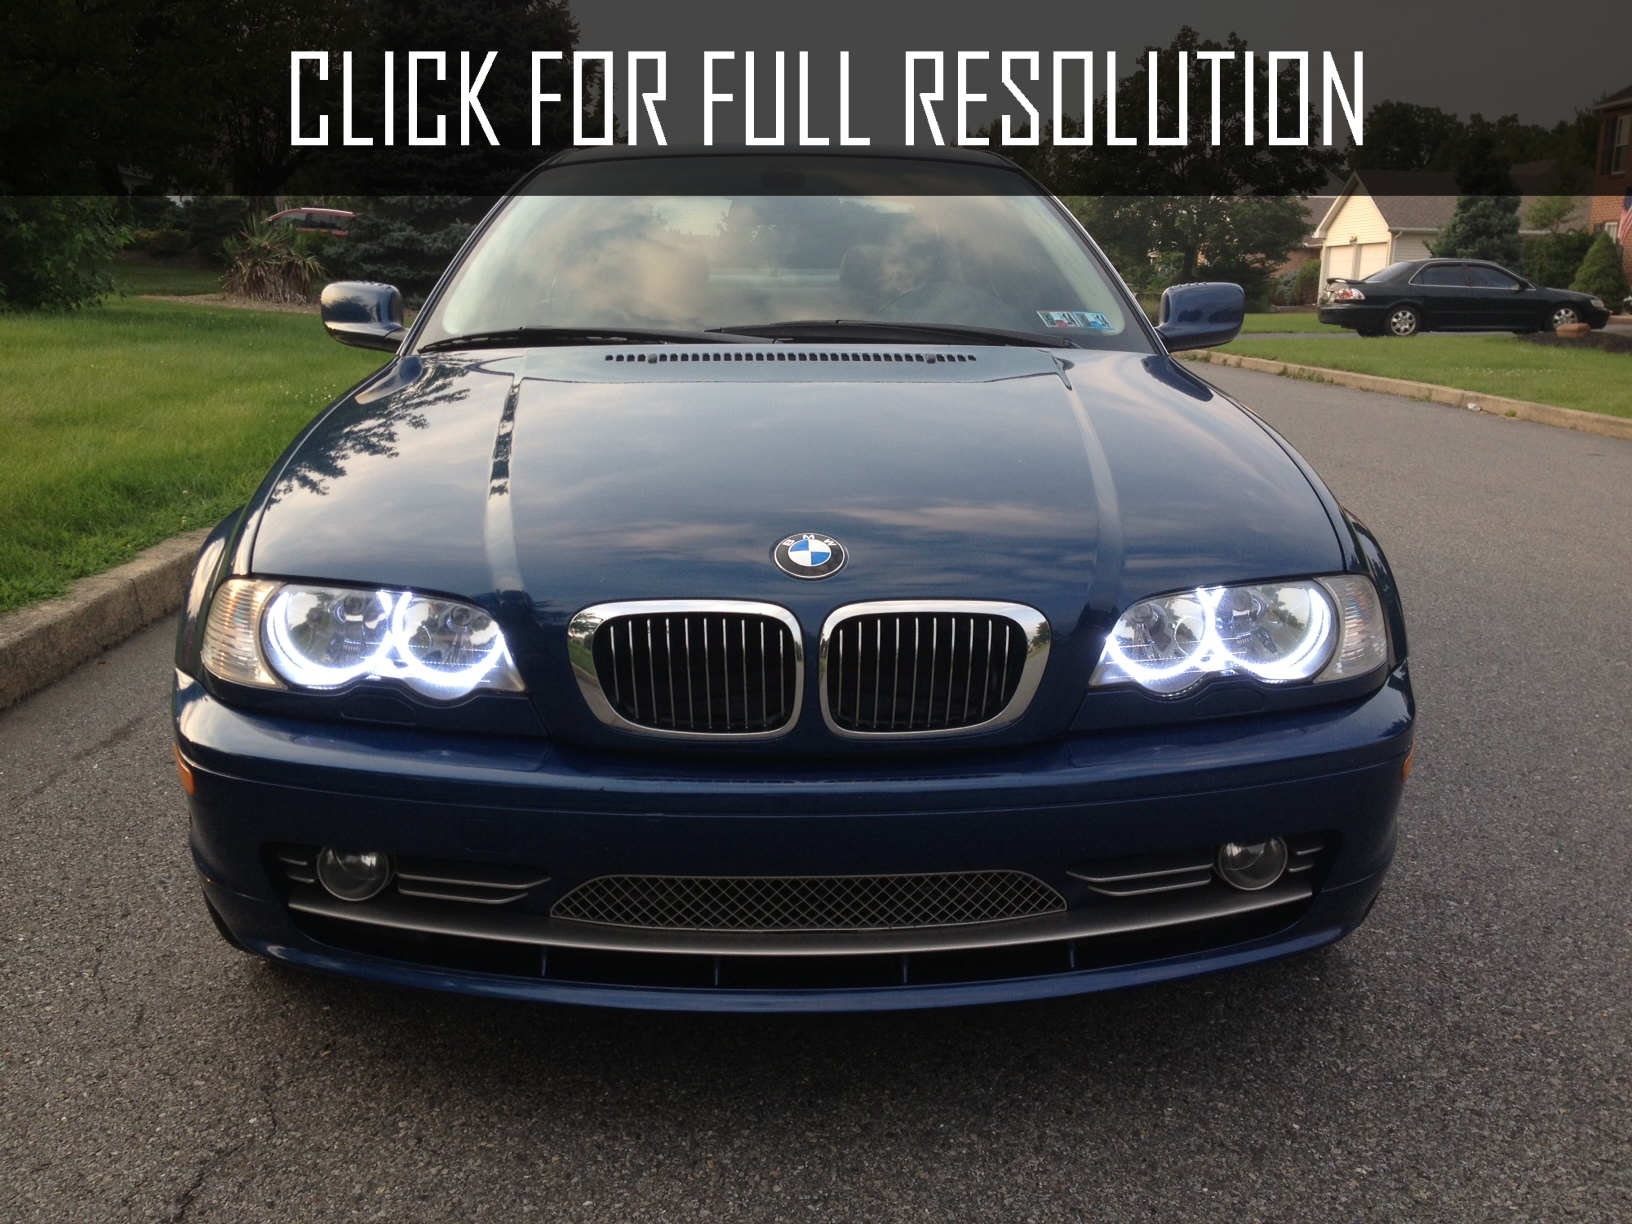 2002 Bmw 318i E46 news, reviews, msrp, ratings with